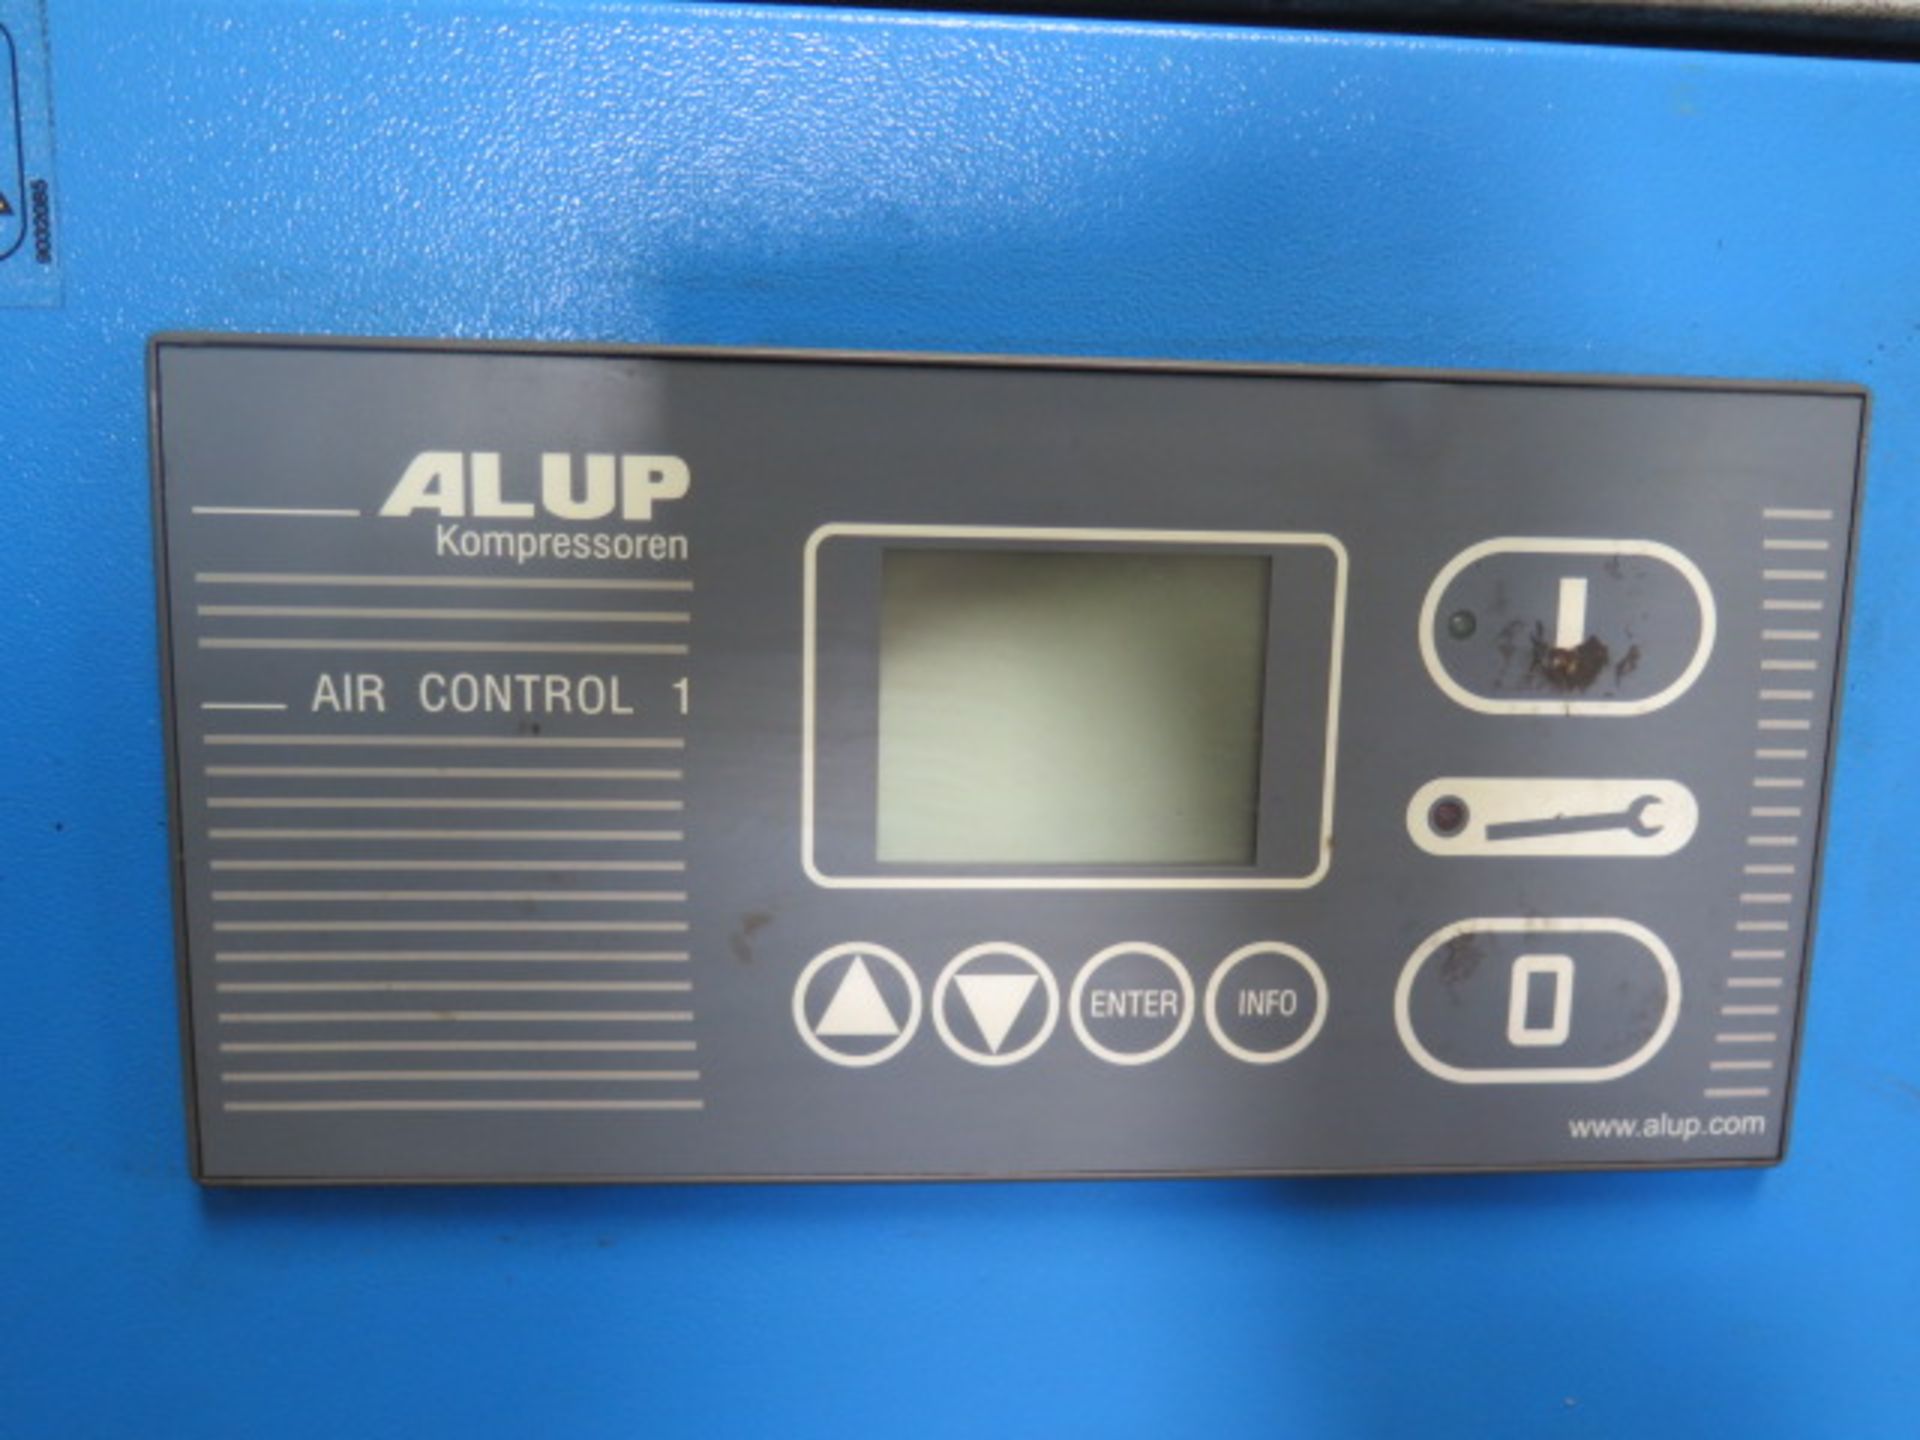 Alup COMBI II mdl. C25255 25Hp Rotary Air Comp s/n HOP250016 w/ Alup Digital Controls, SOLD AS IS - Image 4 of 10